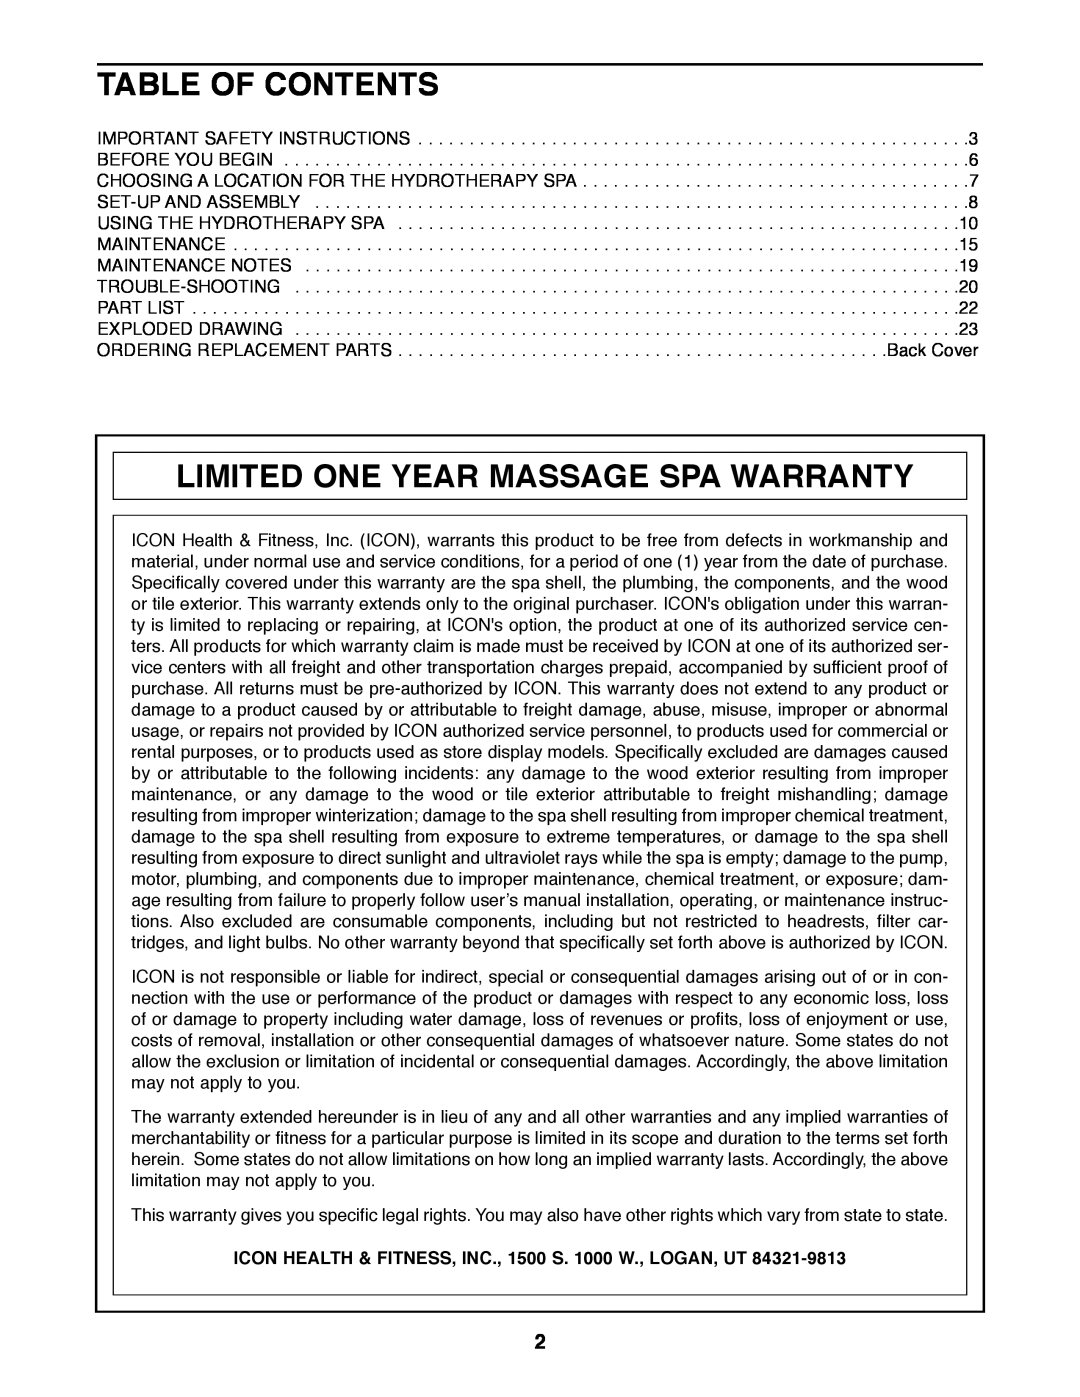 Weslo WLHS42081 manual Table Of Contents, Limited One Year Massage Spa Warranty 